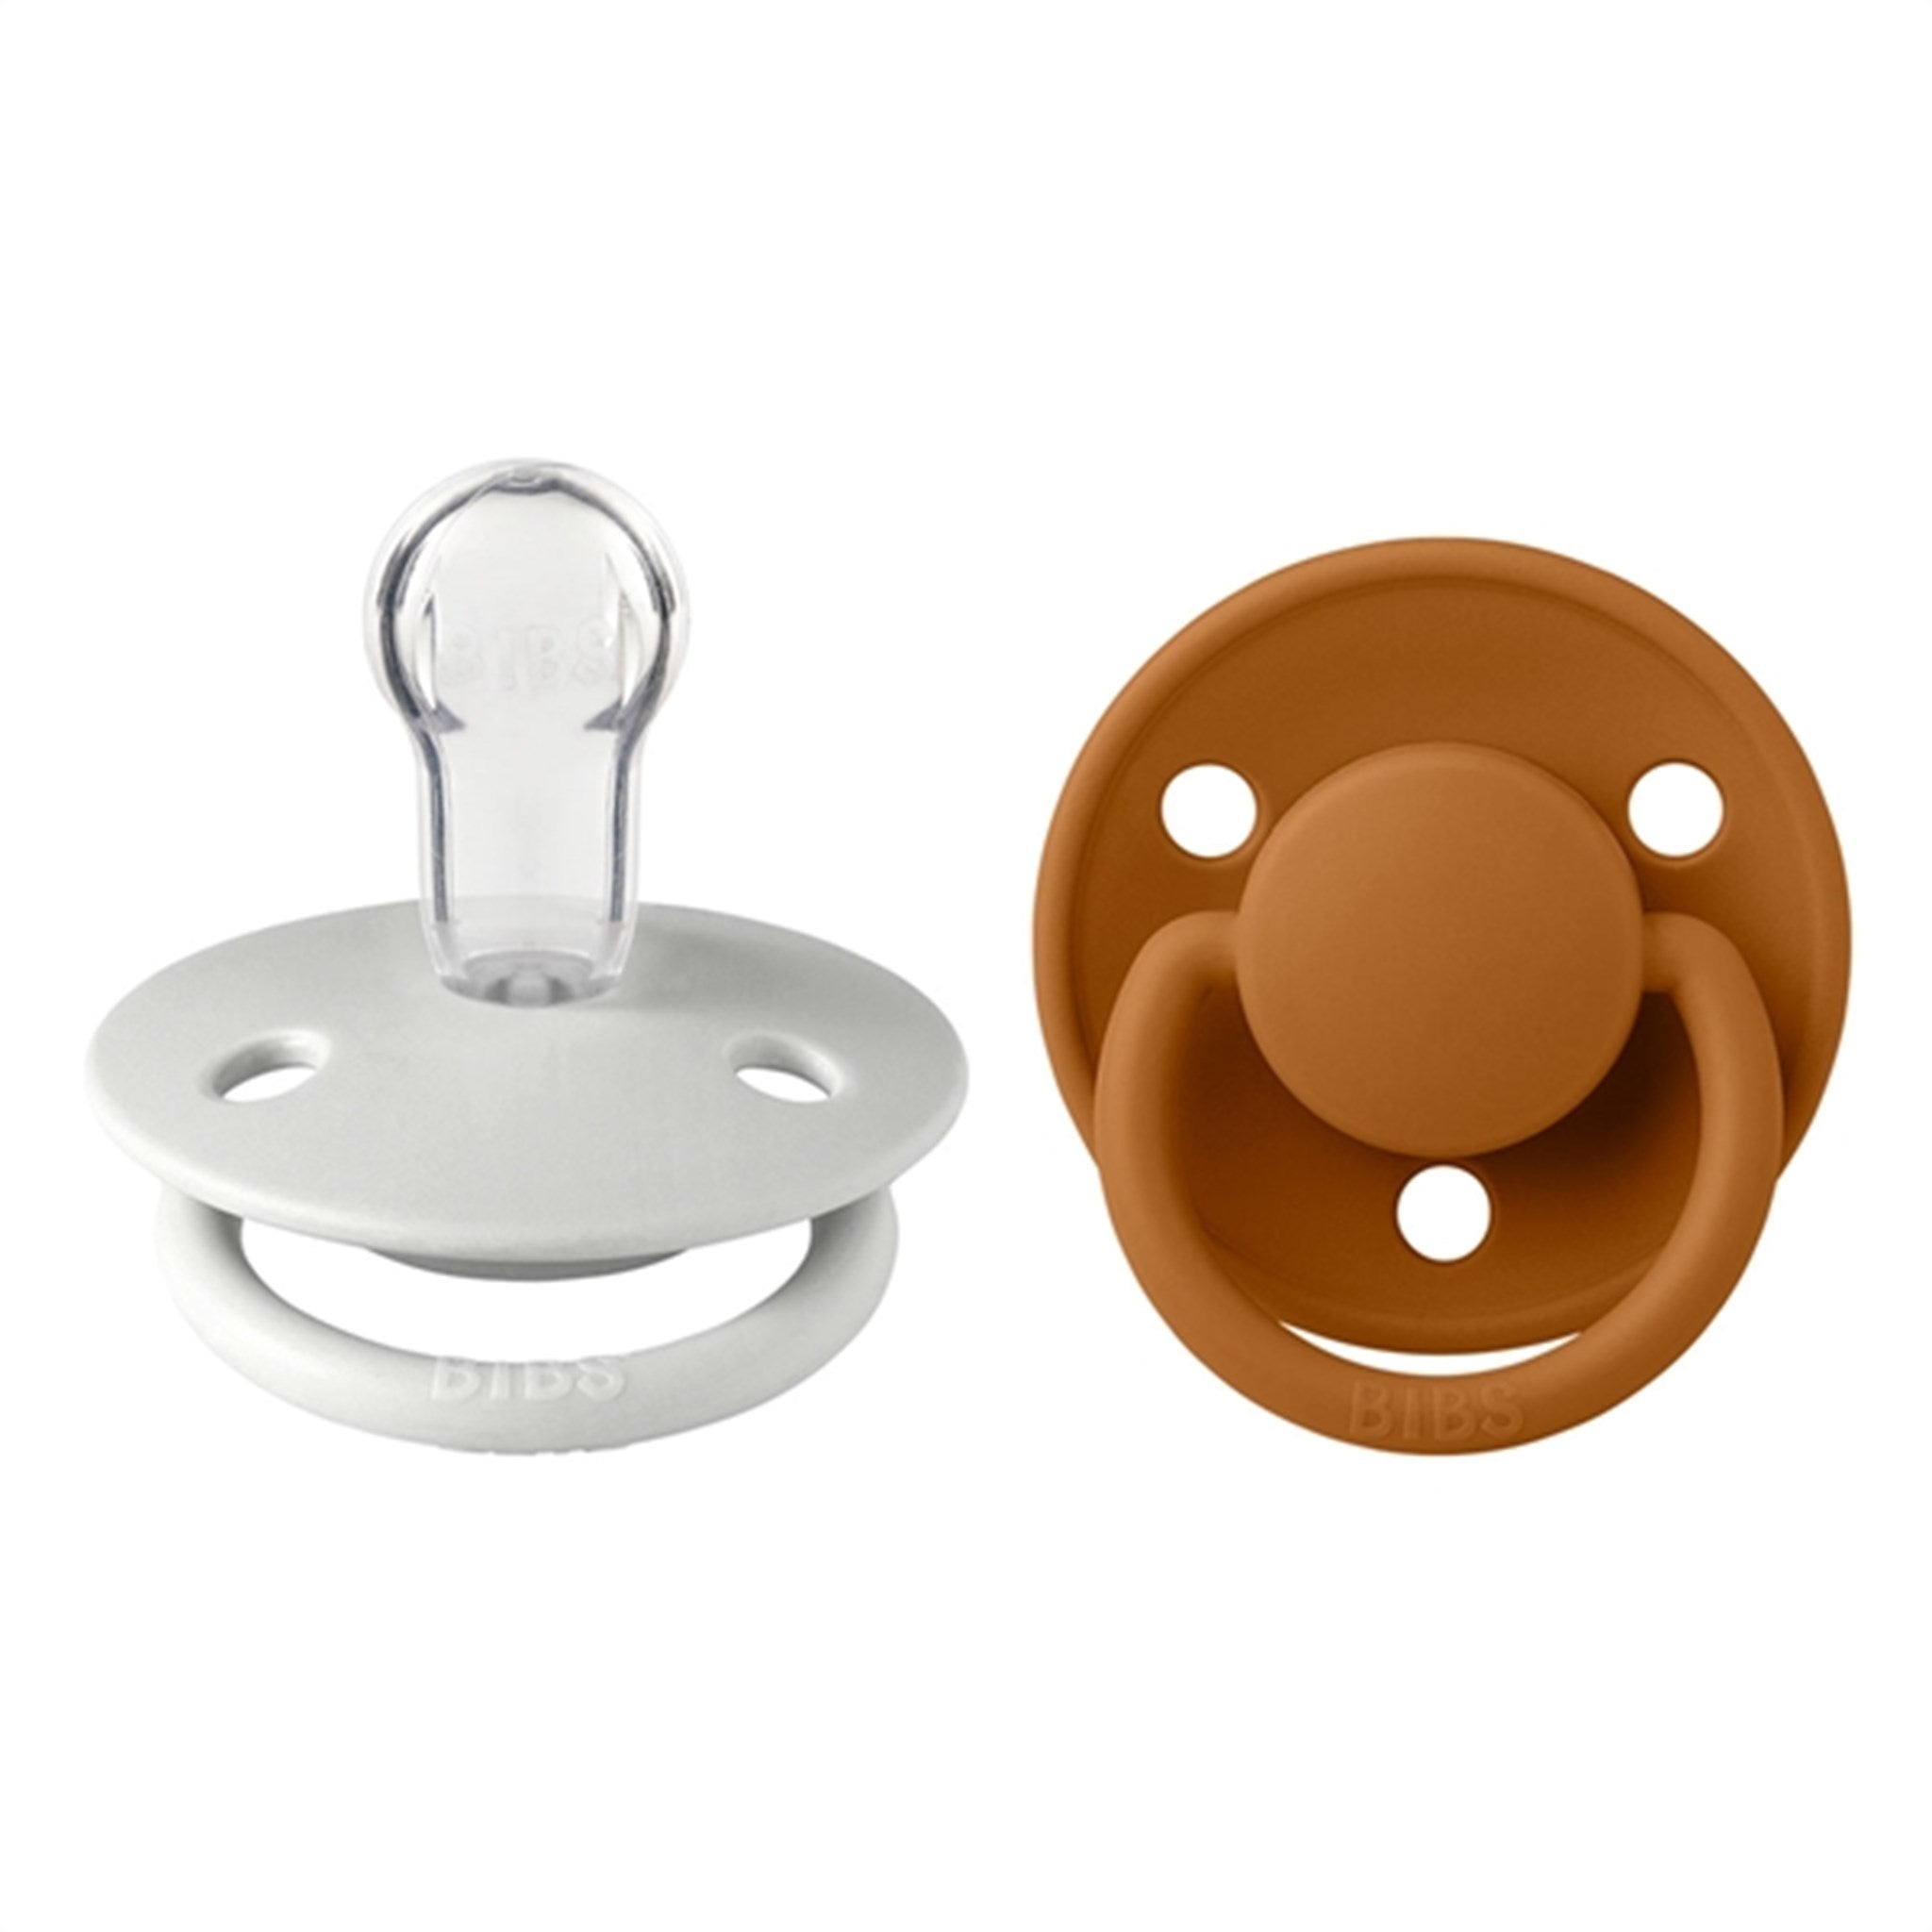 Bibs De Lux Silicone Pacifiers 2-pak Round Honey Bee/Olive 4